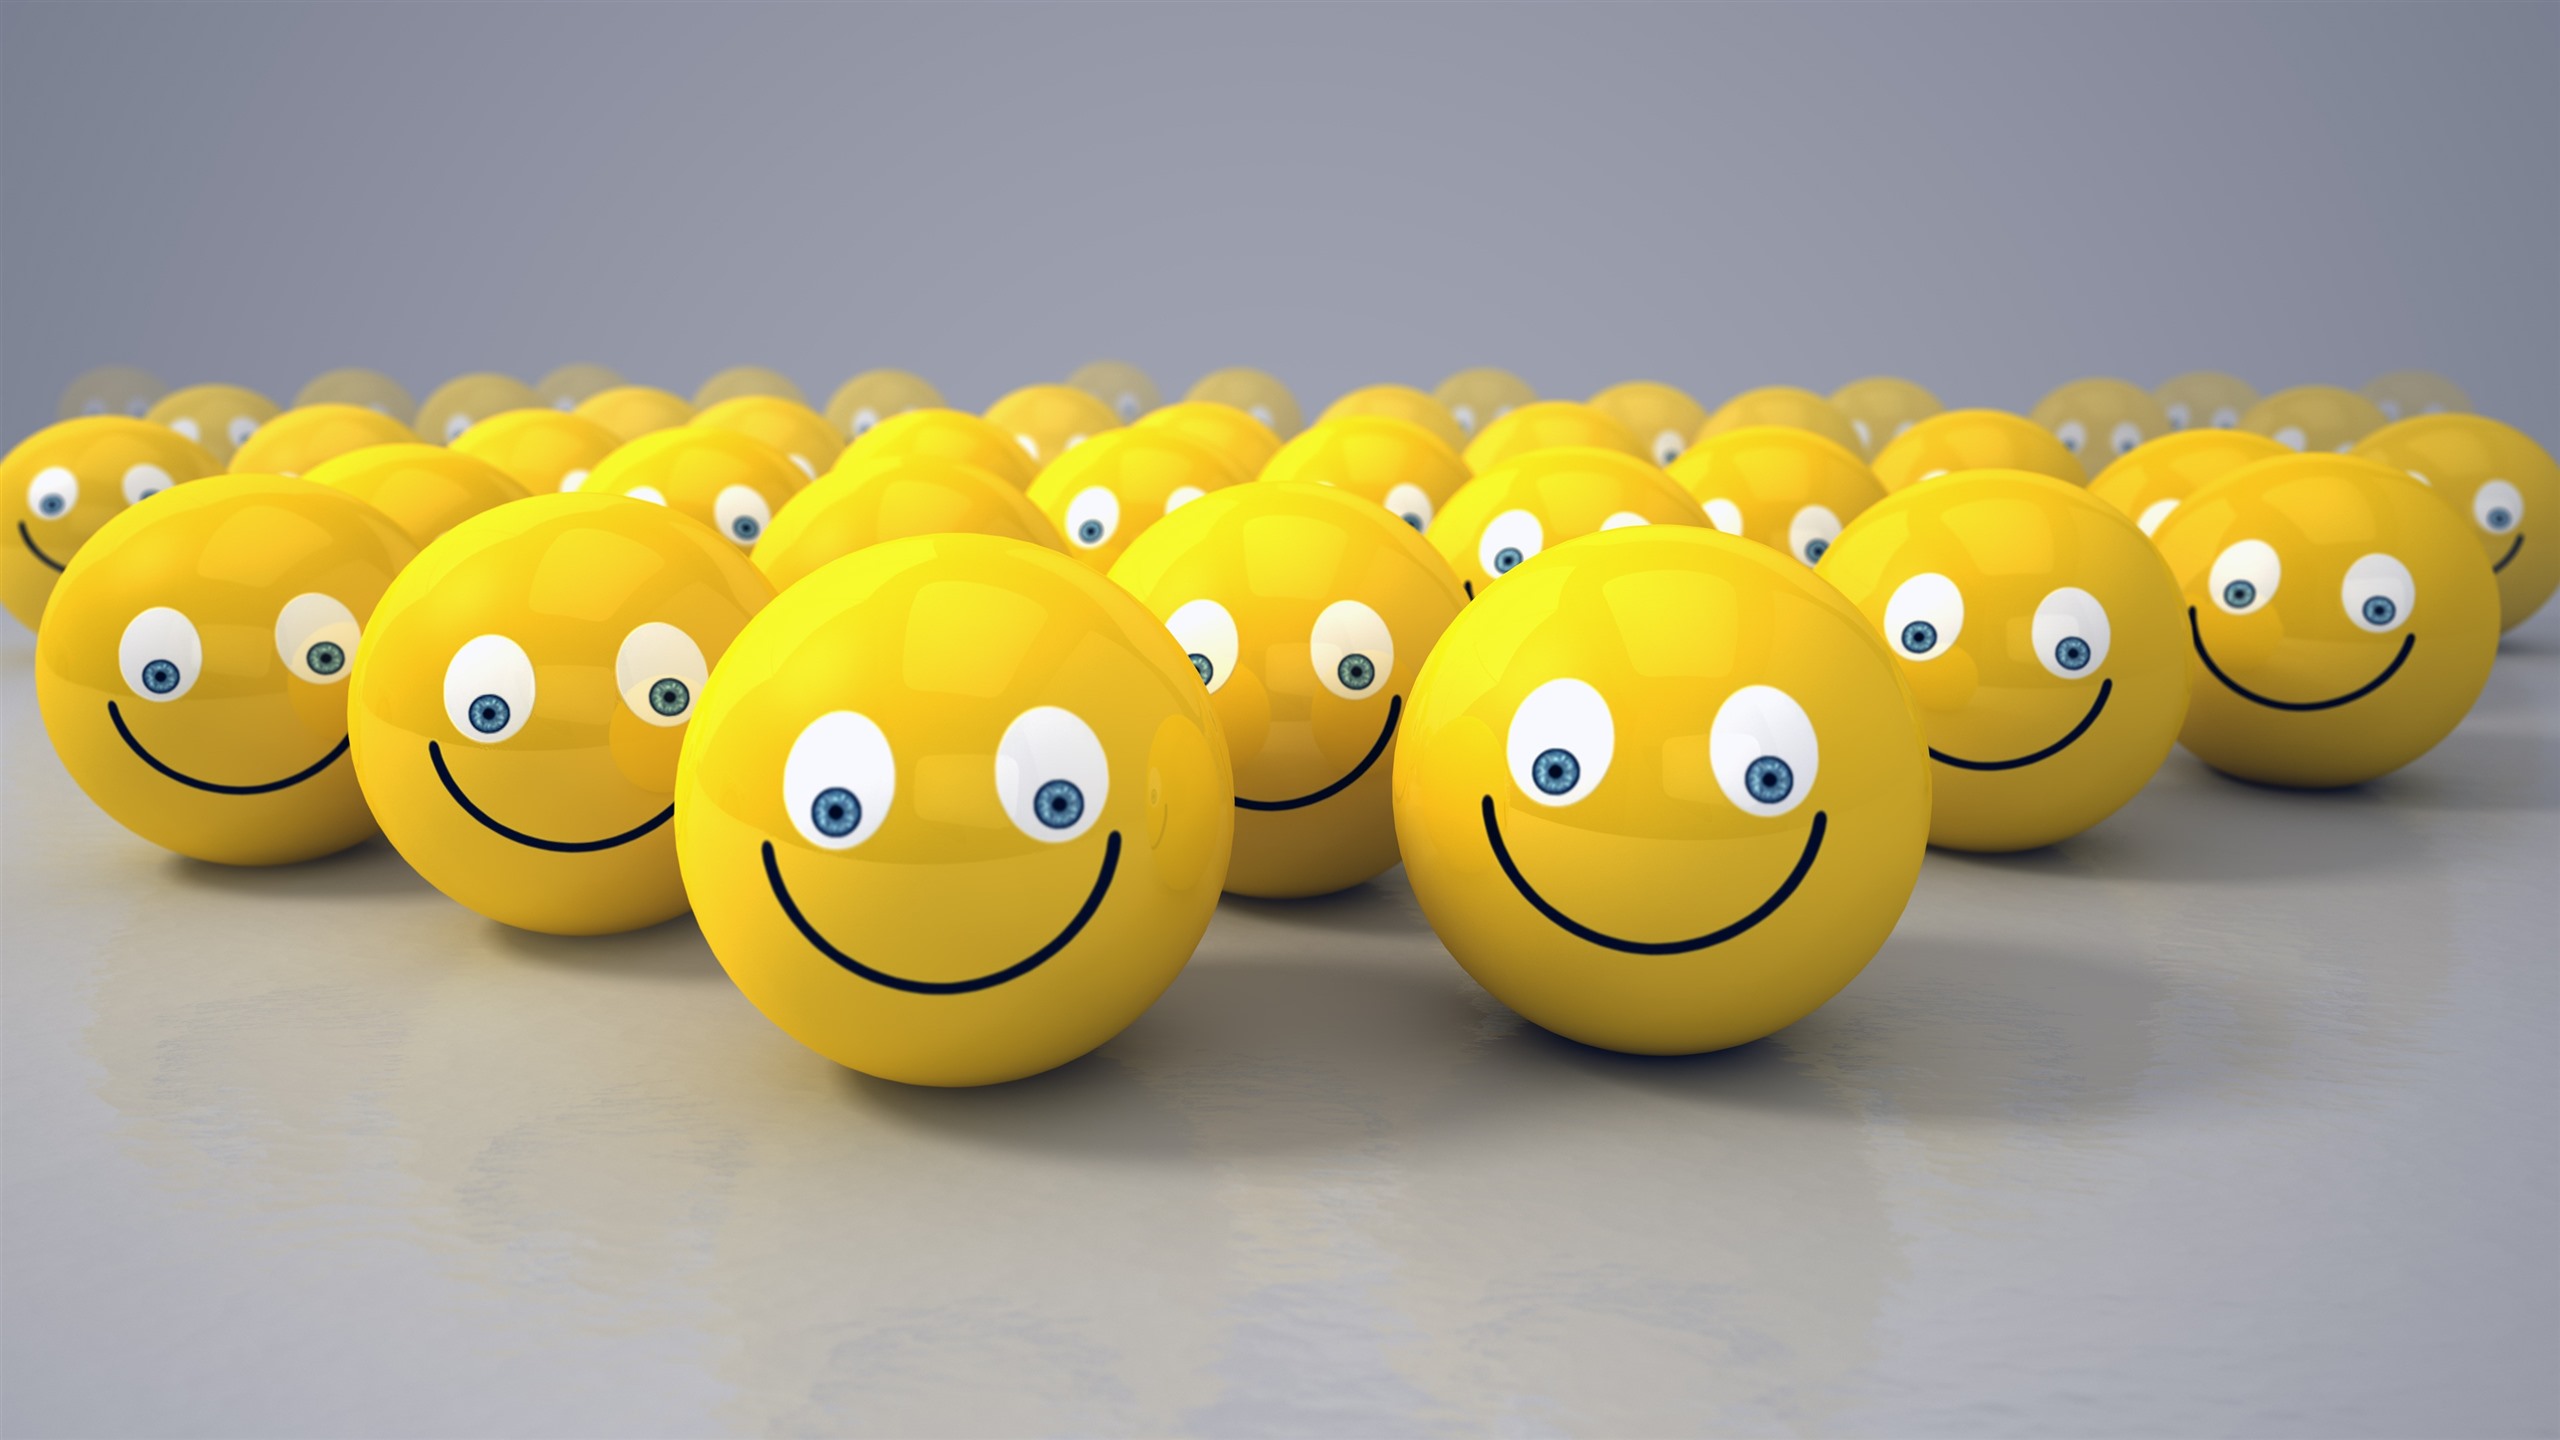 Many Yellow Smiley Face, 3D Design 1080x1920 IPhone 8 7 6 6S Plus Wallpaper, Background, Picture, Image